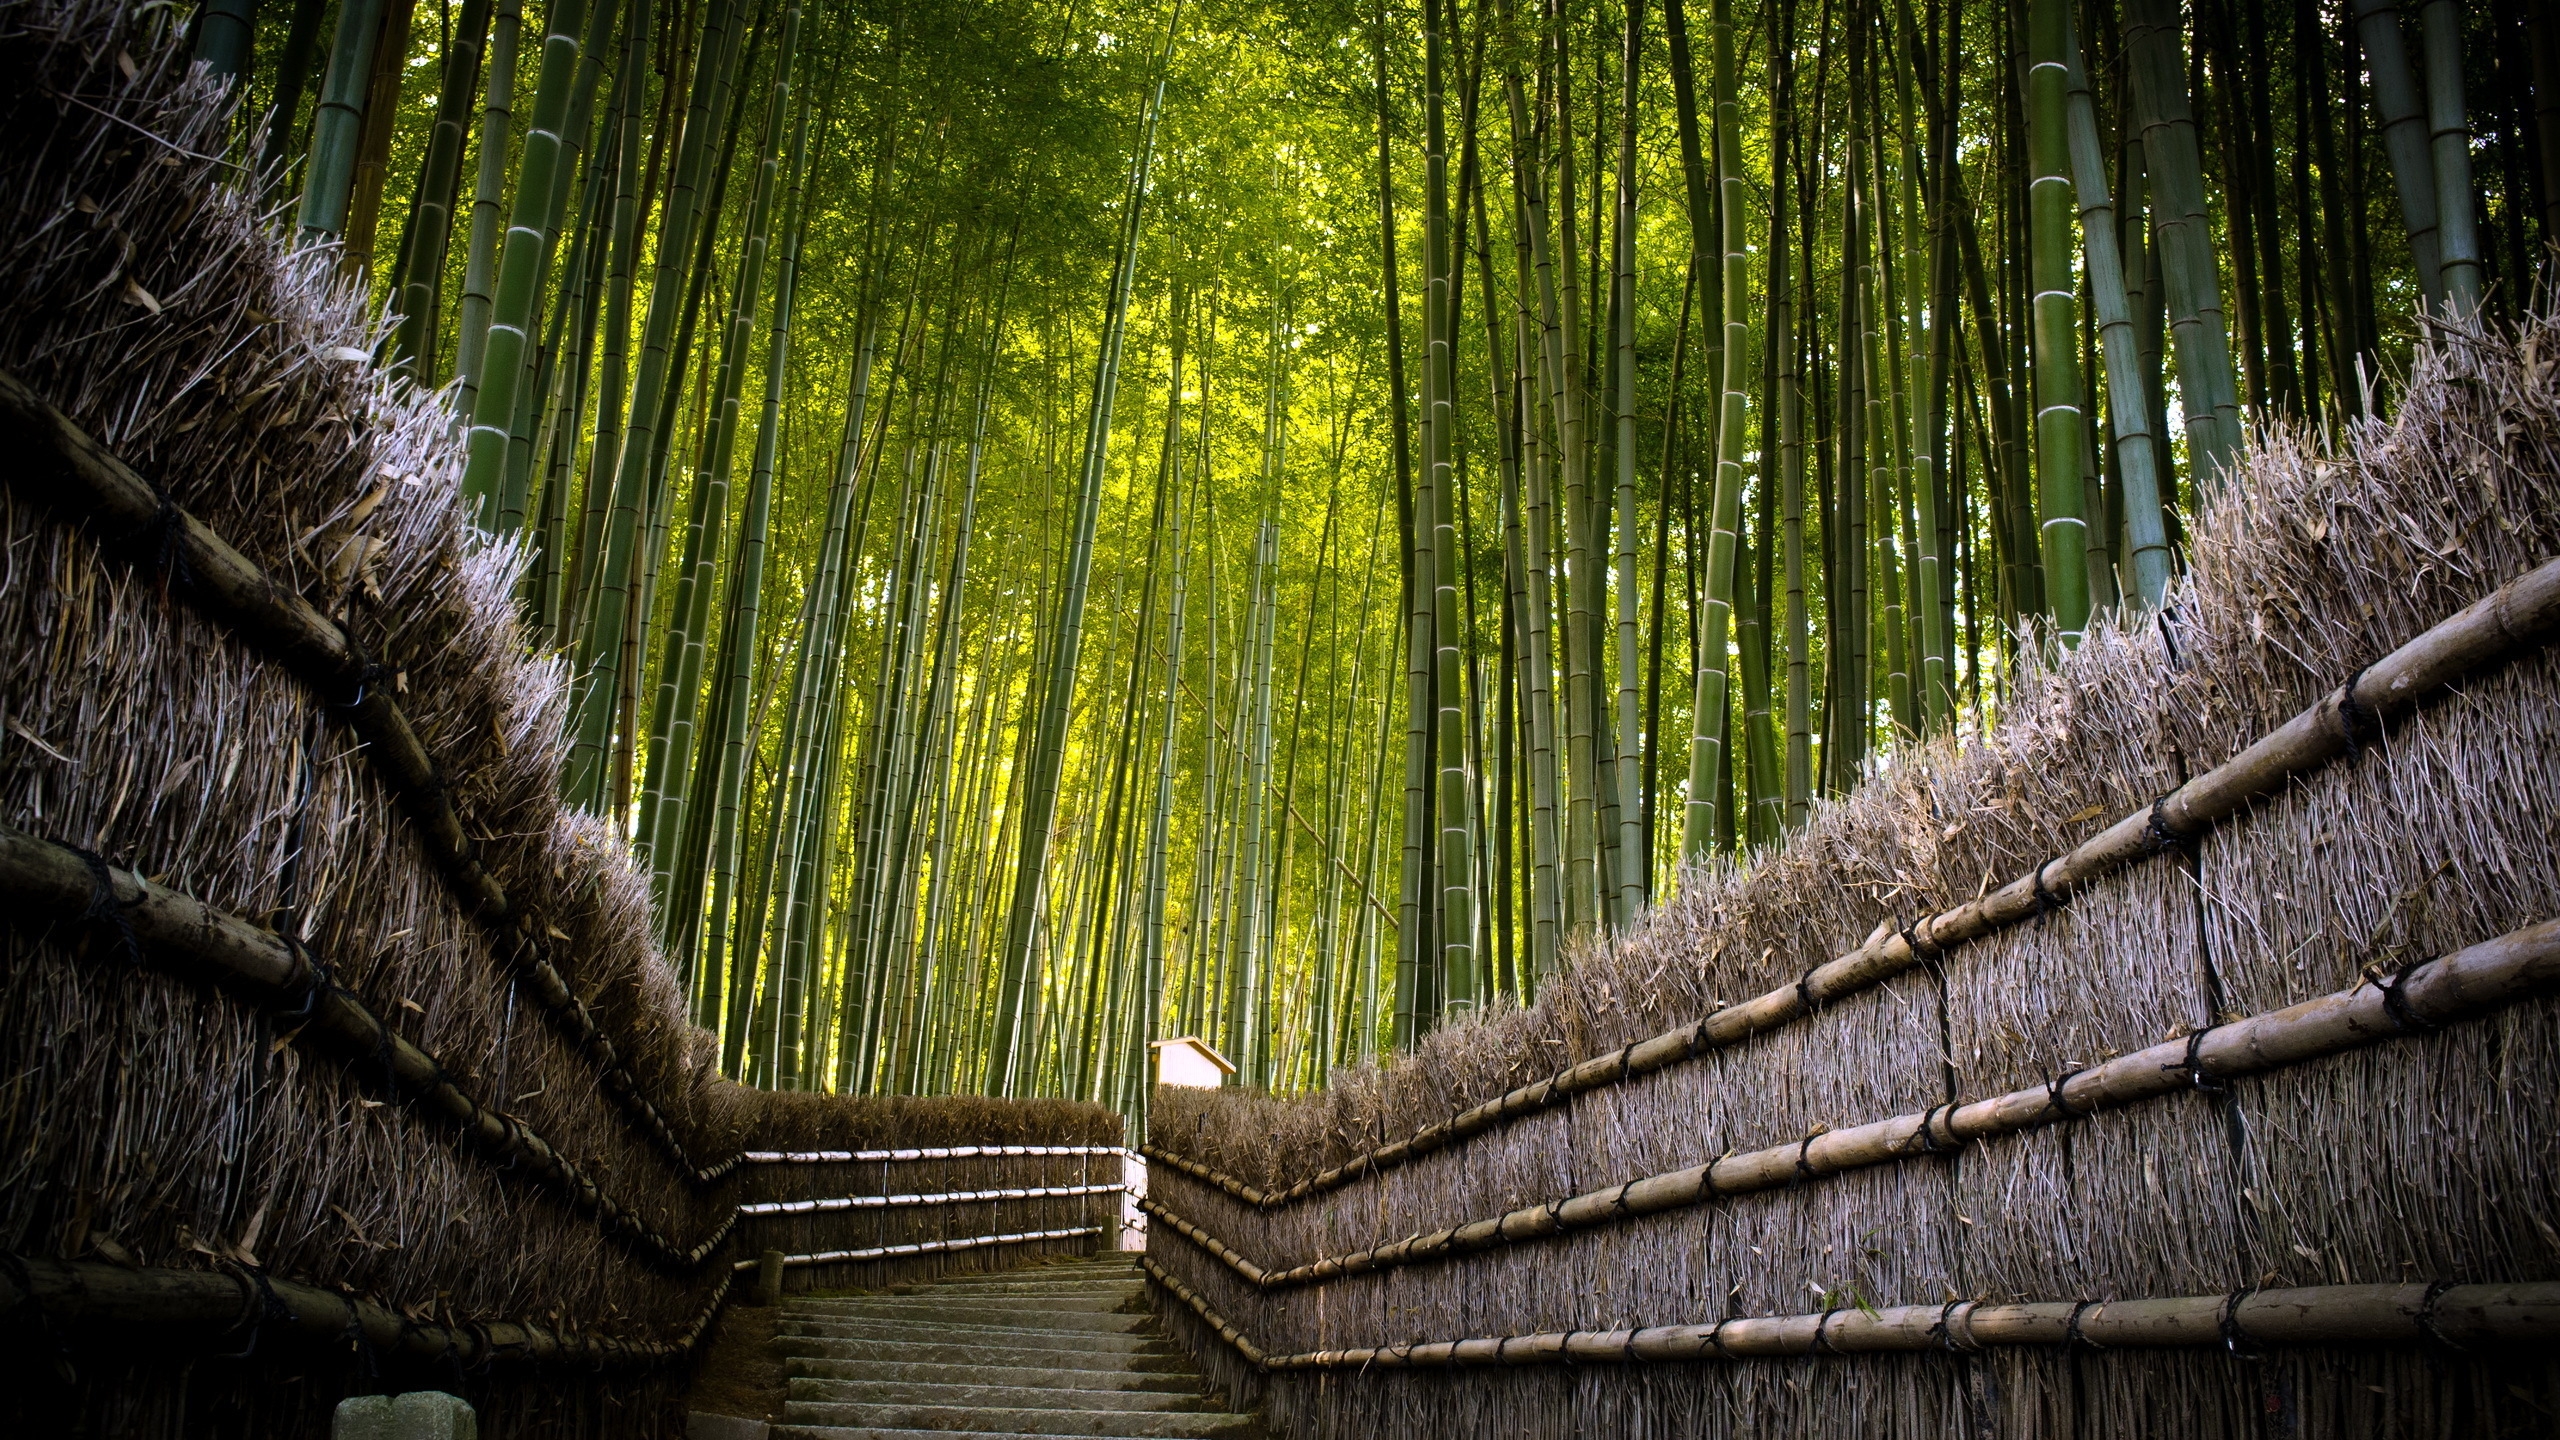 Bamboo Fence for 2560x1440 HDTV resolution